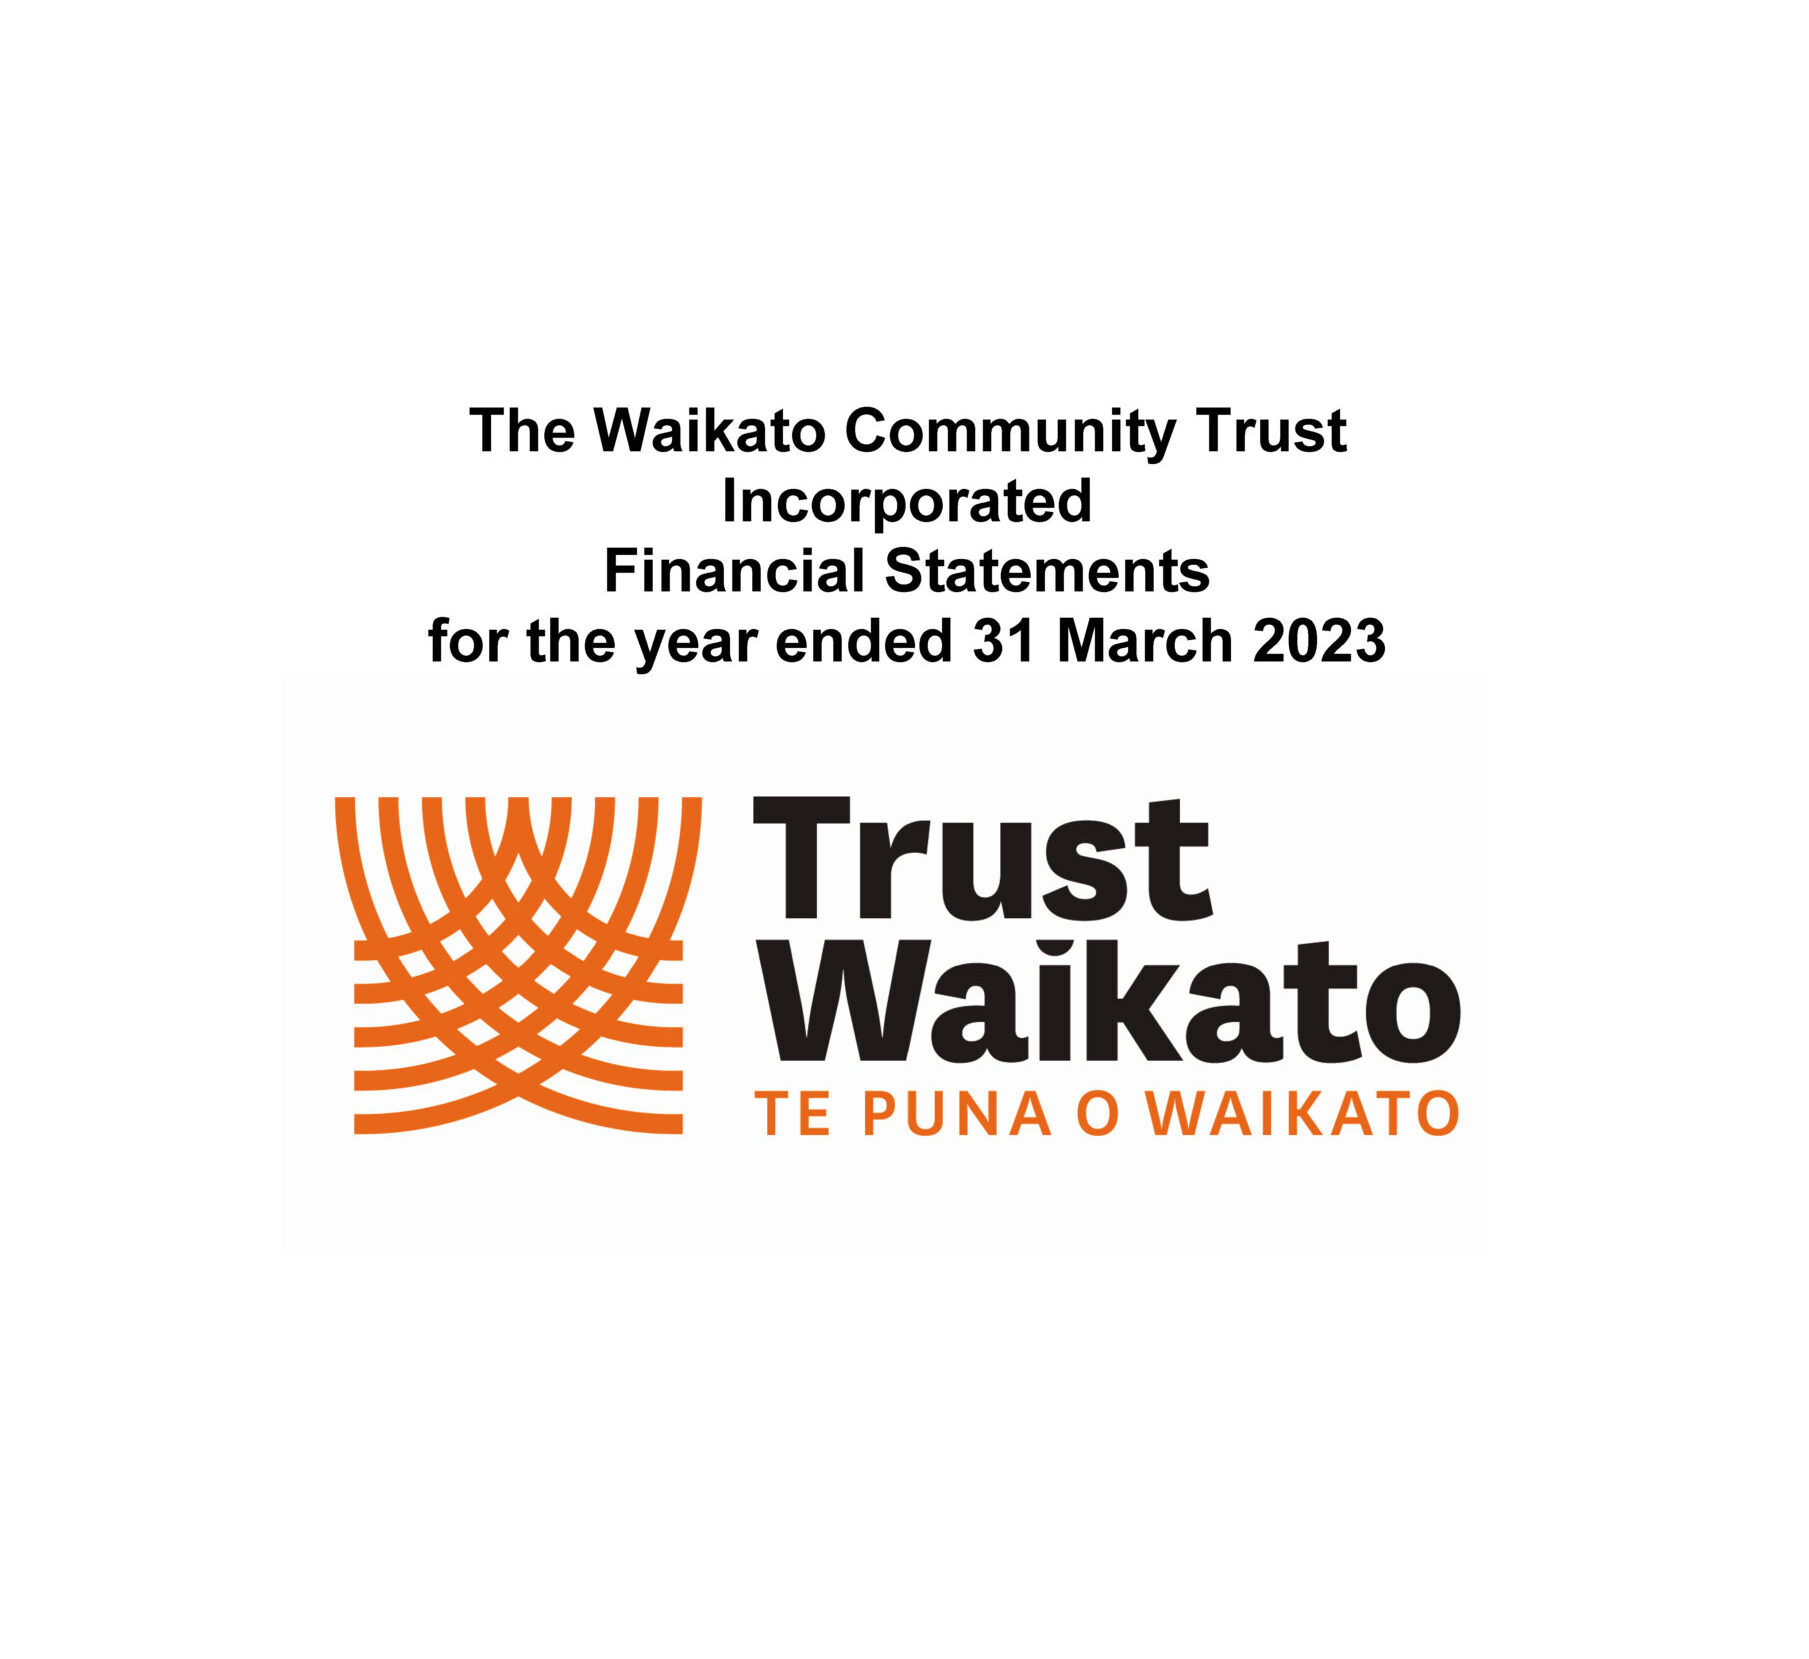 The Waikato Community Trust Incorporated Financial Statements for the year ended 31 March 2023